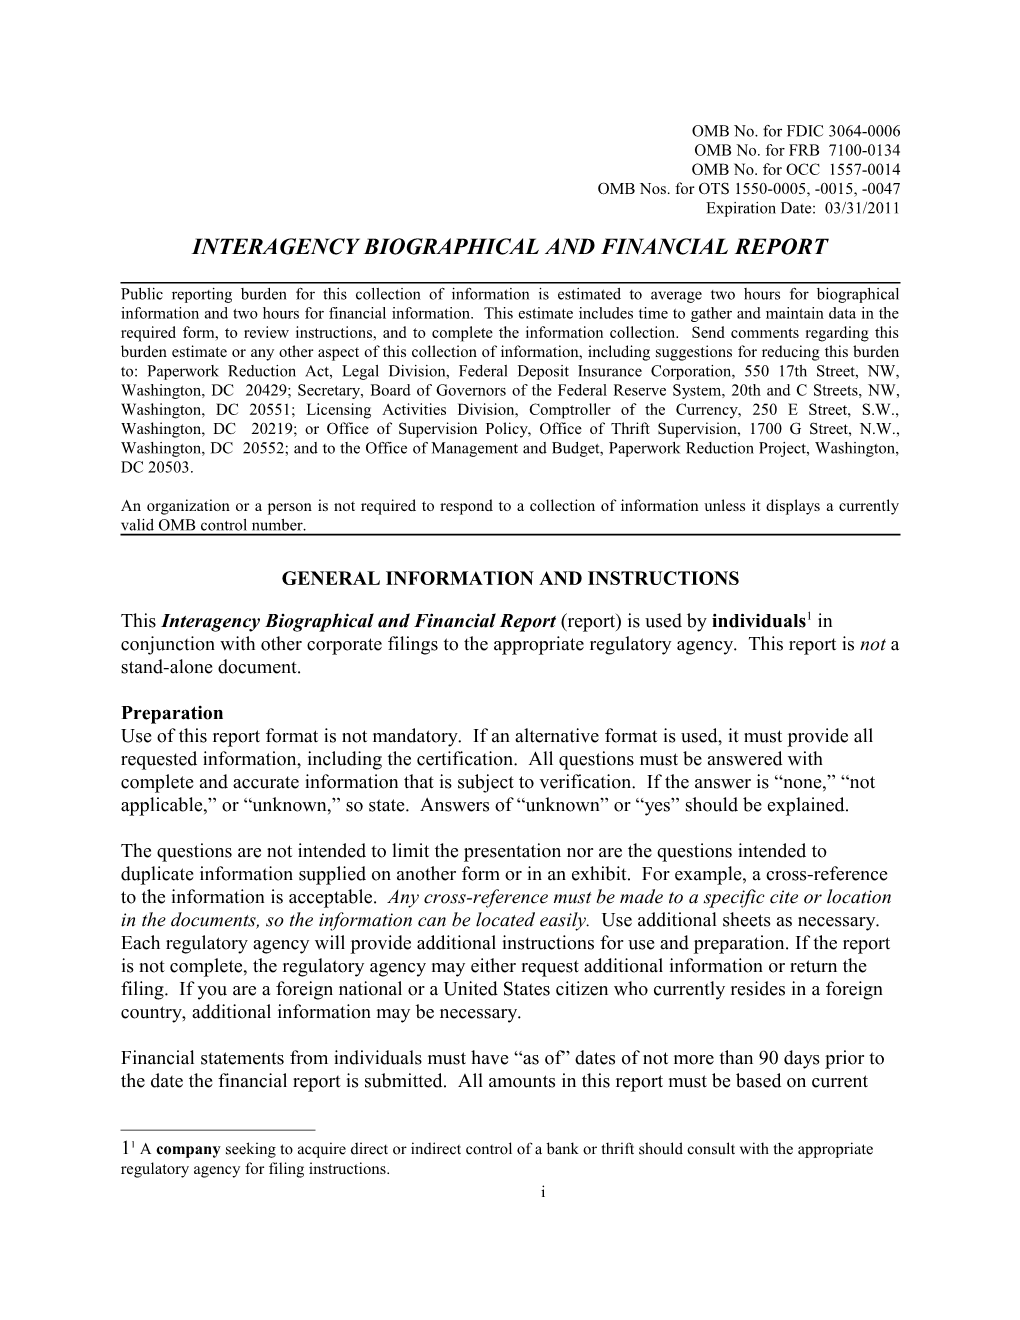 Interagency Biographical and Financial Report